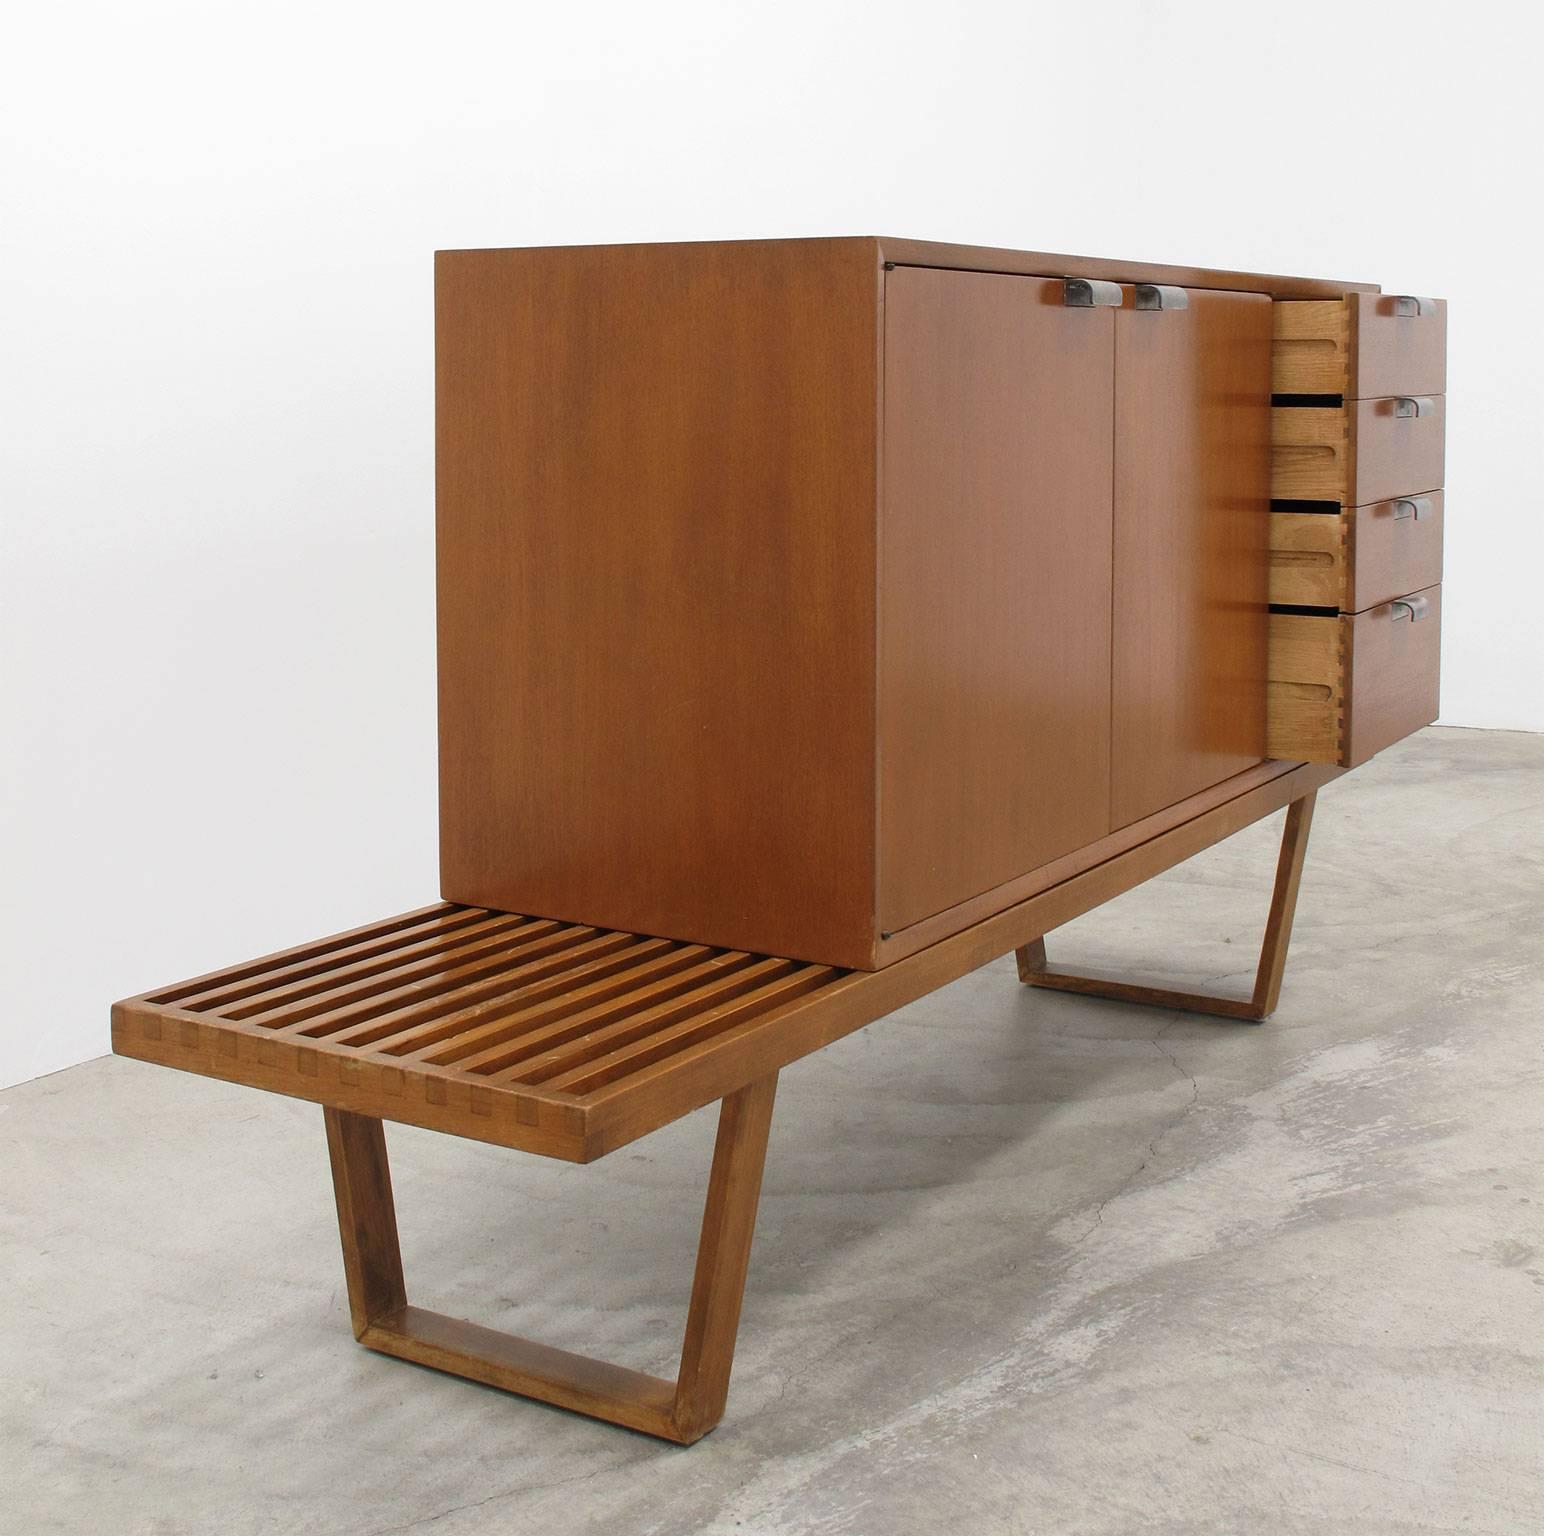 George Nelson Wood Cabinet on Slat Bench, 1950s Vintage Herman Miller In Good Condition For Sale In Los Angeles, CA